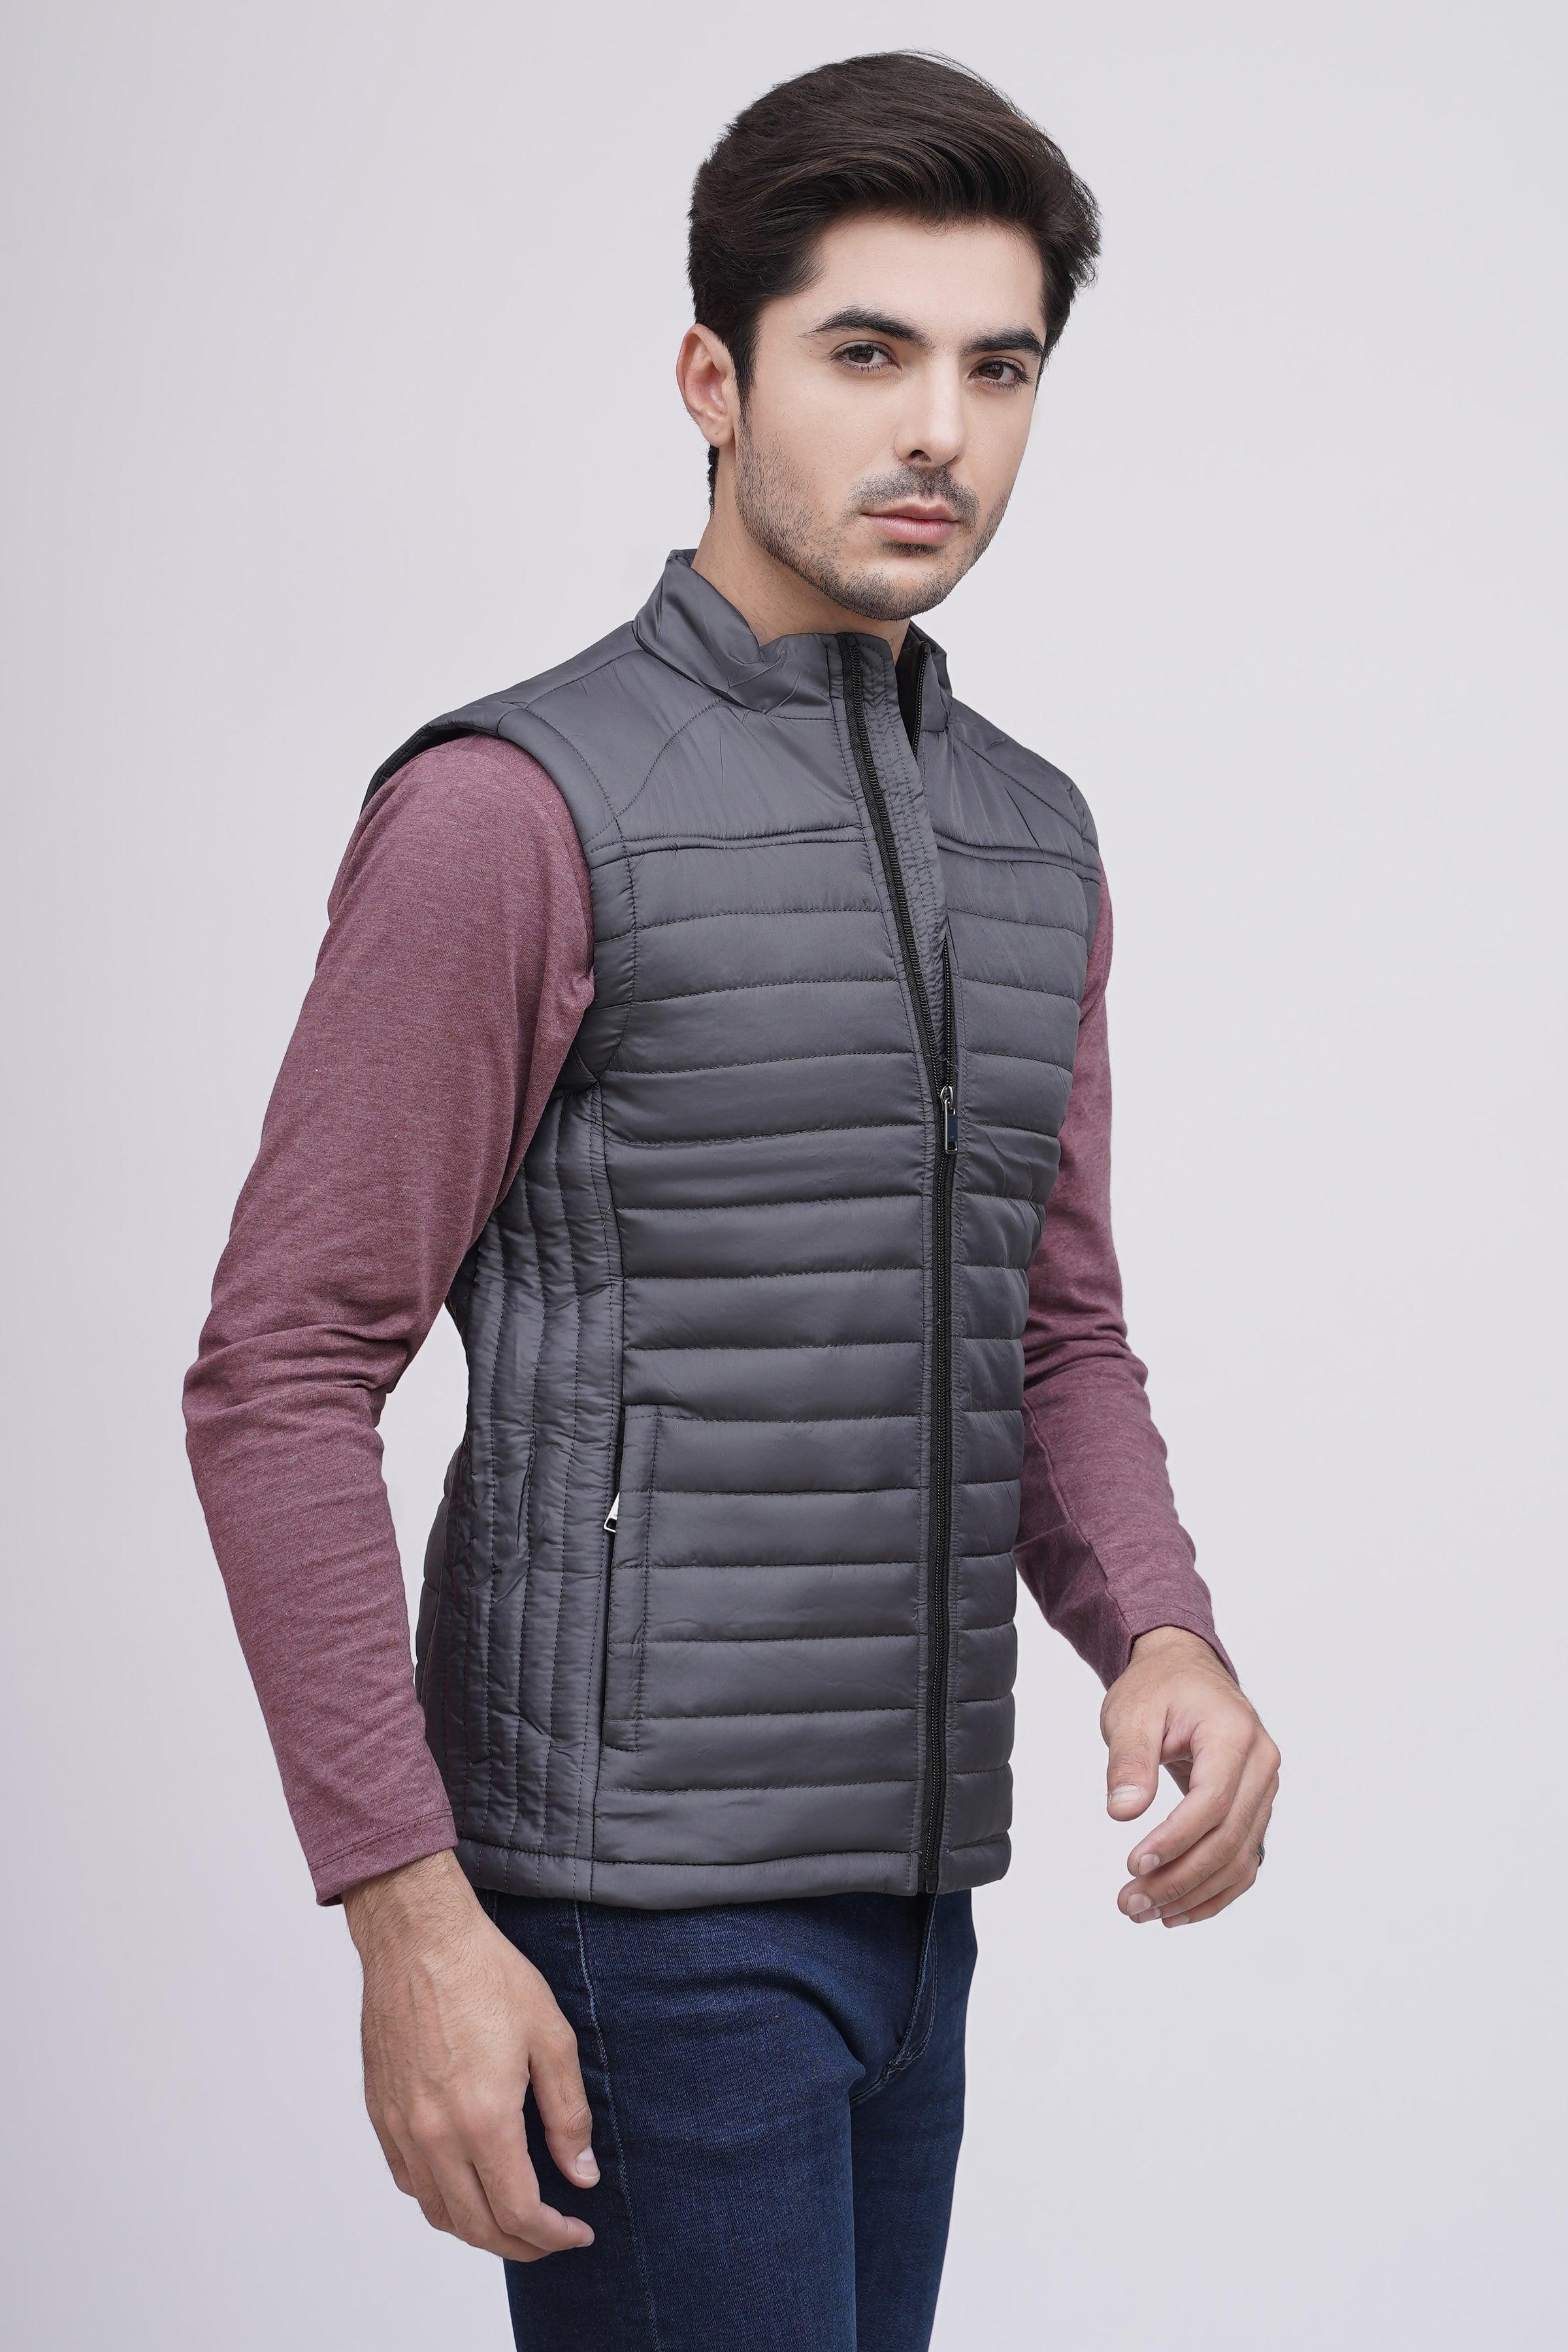 PUFFER JACKET S/L GREY at Charcoal Clothing